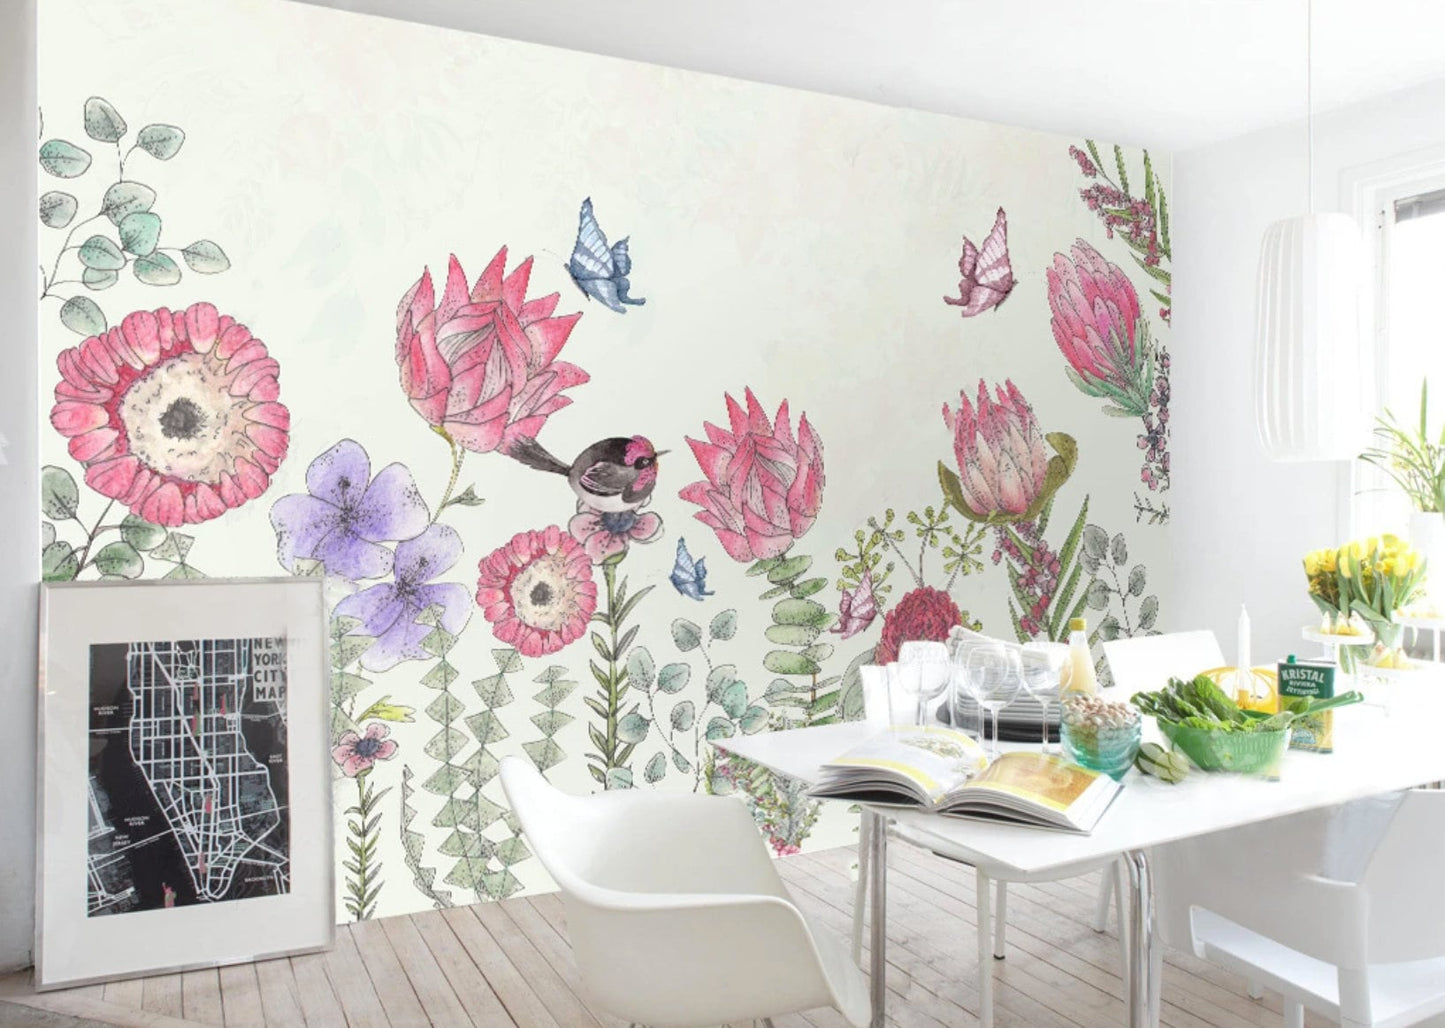 Peel and stick Wallpaper with birds and flowers Flower wall backdrop Peony wallpaper Botanical removable Home wall decor Murals for girls